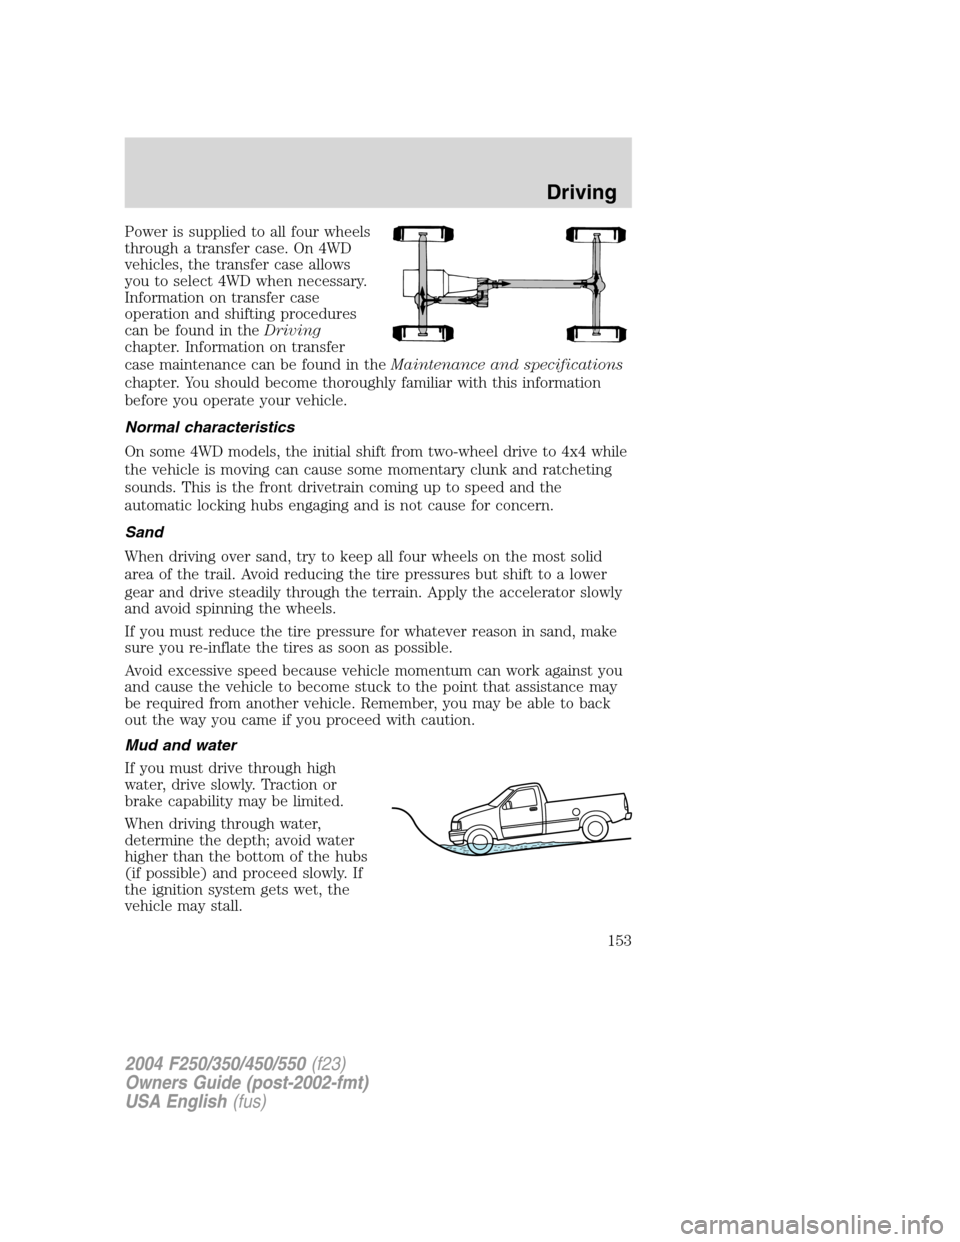 FORD SUPER DUTY 2004 1.G Owners Manual Power is supplied to all four wheels
through a transfer case. On 4WD
vehicles, the transfer case allows
you to select 4WD when necessary.
Information on transfer case
operation and shifting procedures